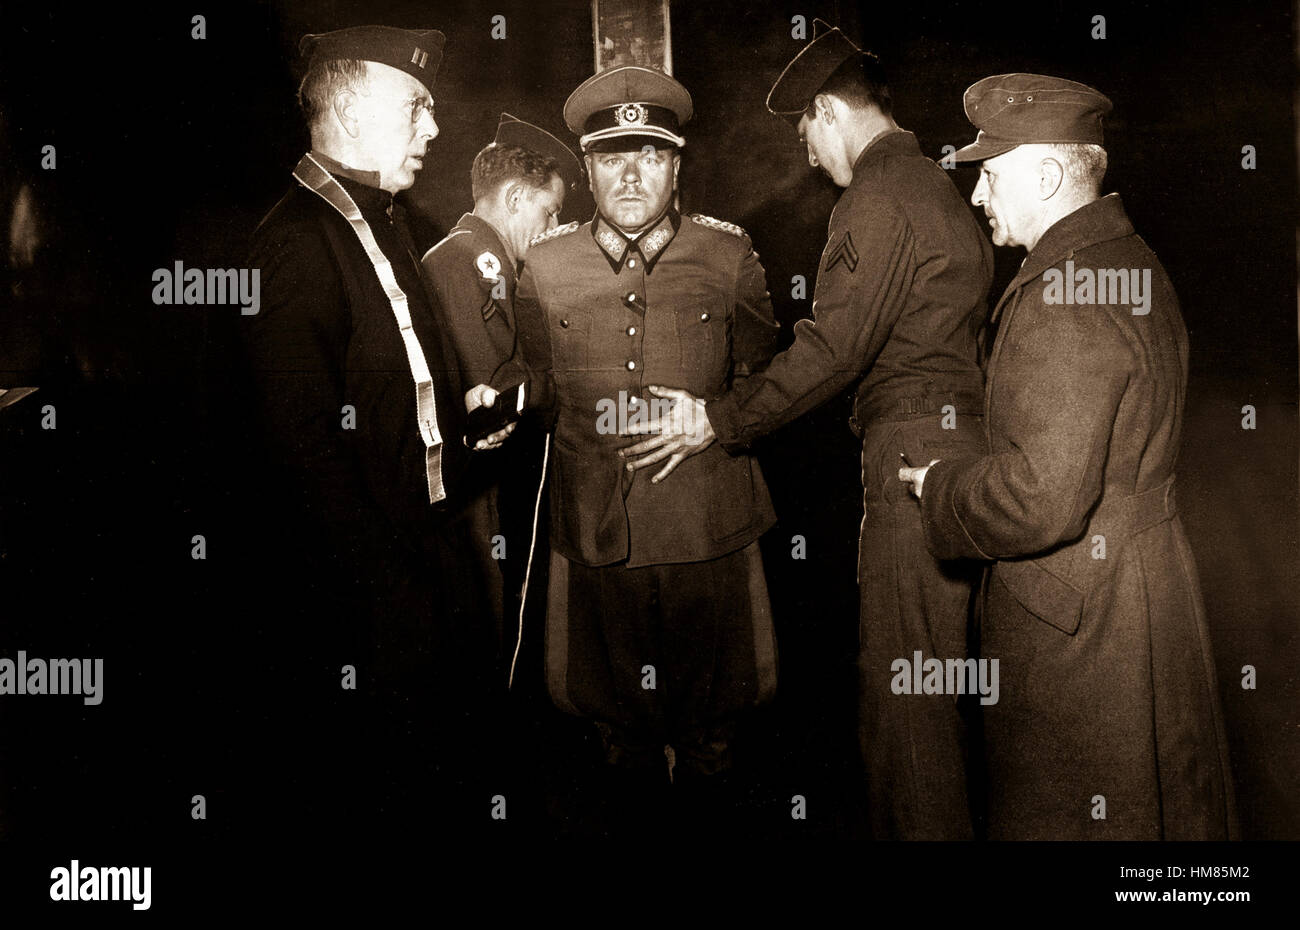 German Gen. Anton Dostler is tied to a stake before his execution by a firing squad in the Aversa stockade.  The General was convicted and sentenced to death by an American military tribunal.  Aversa, Italy.  December 1, 1945.  Blomgren.  (Army) NARA FILE #:  111-SC-225295 WAR & CONFLICT BOOK #:  1298 Stock Photo